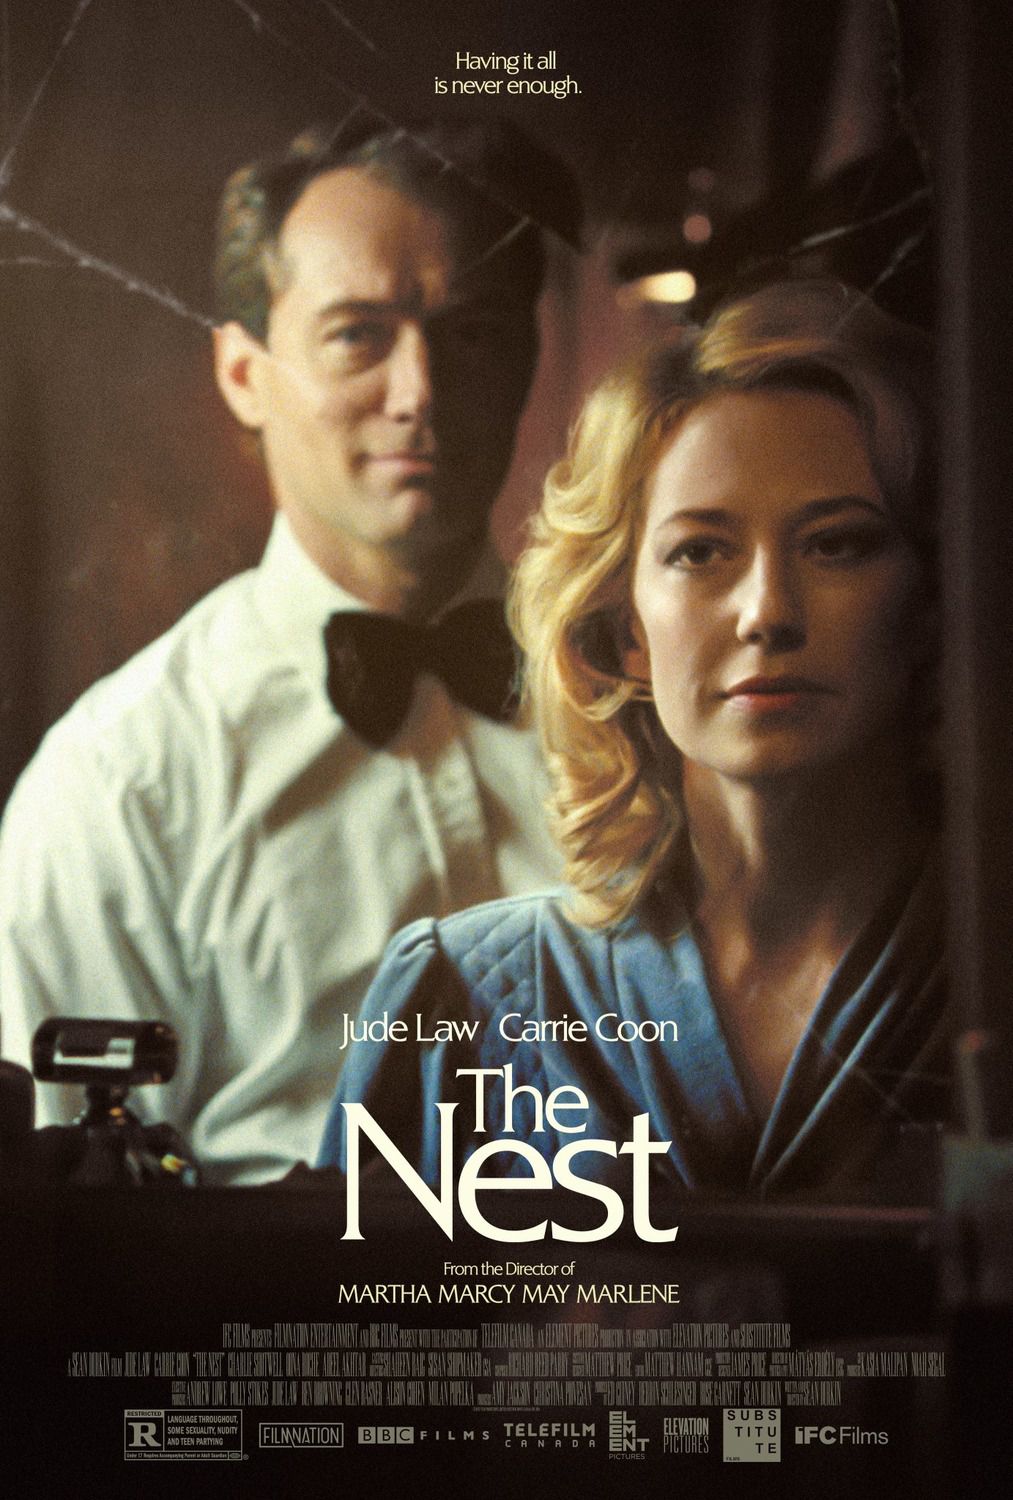 The Nest - Film (2020) streaming VF gratuit complet